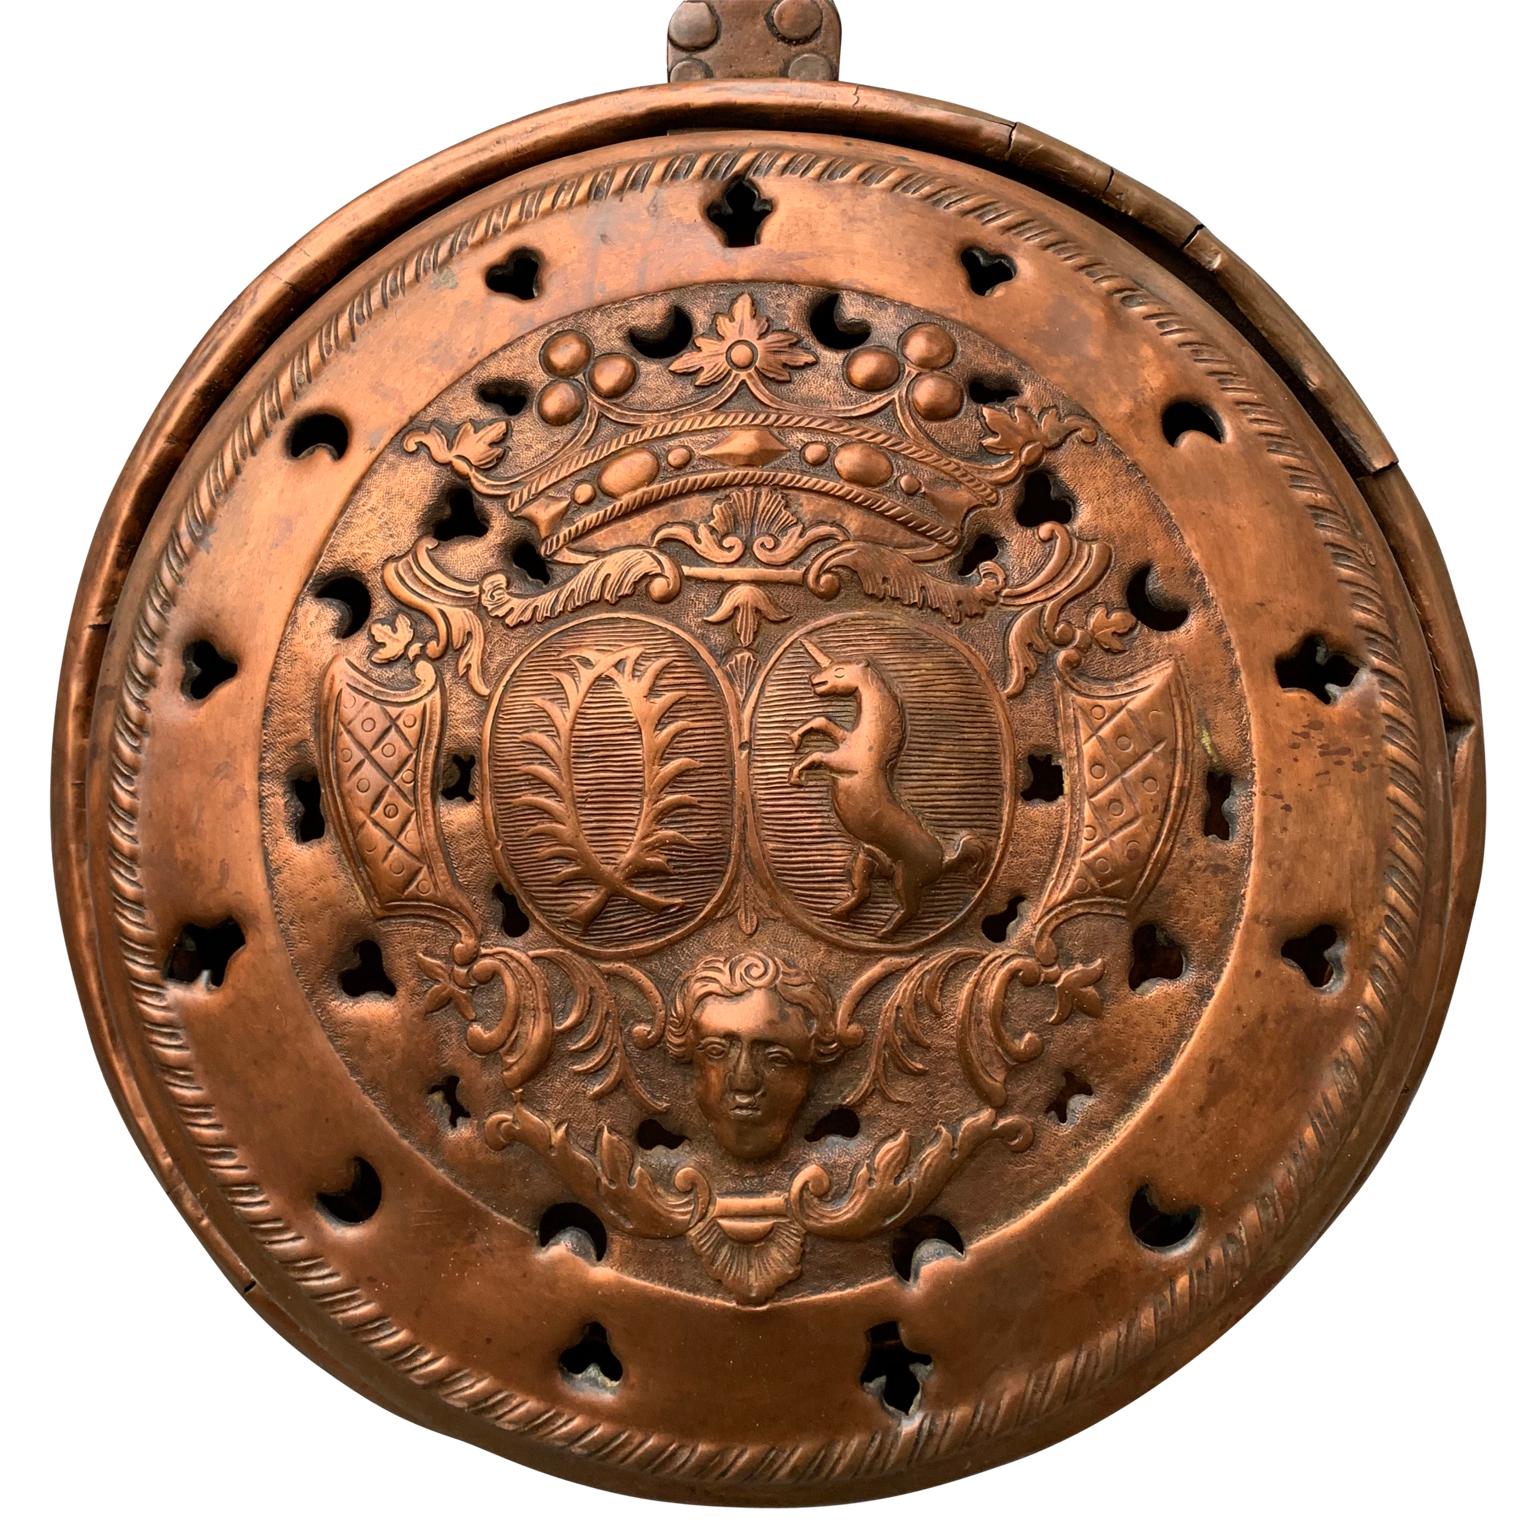 An 18th century French bed warmer in copper with wooden handle. With the hammered decoration of a noble family own coat-of-arms. The last is showing an unicorn which is a symbol for freedom, purity, magic and innocence and two laurel branches that